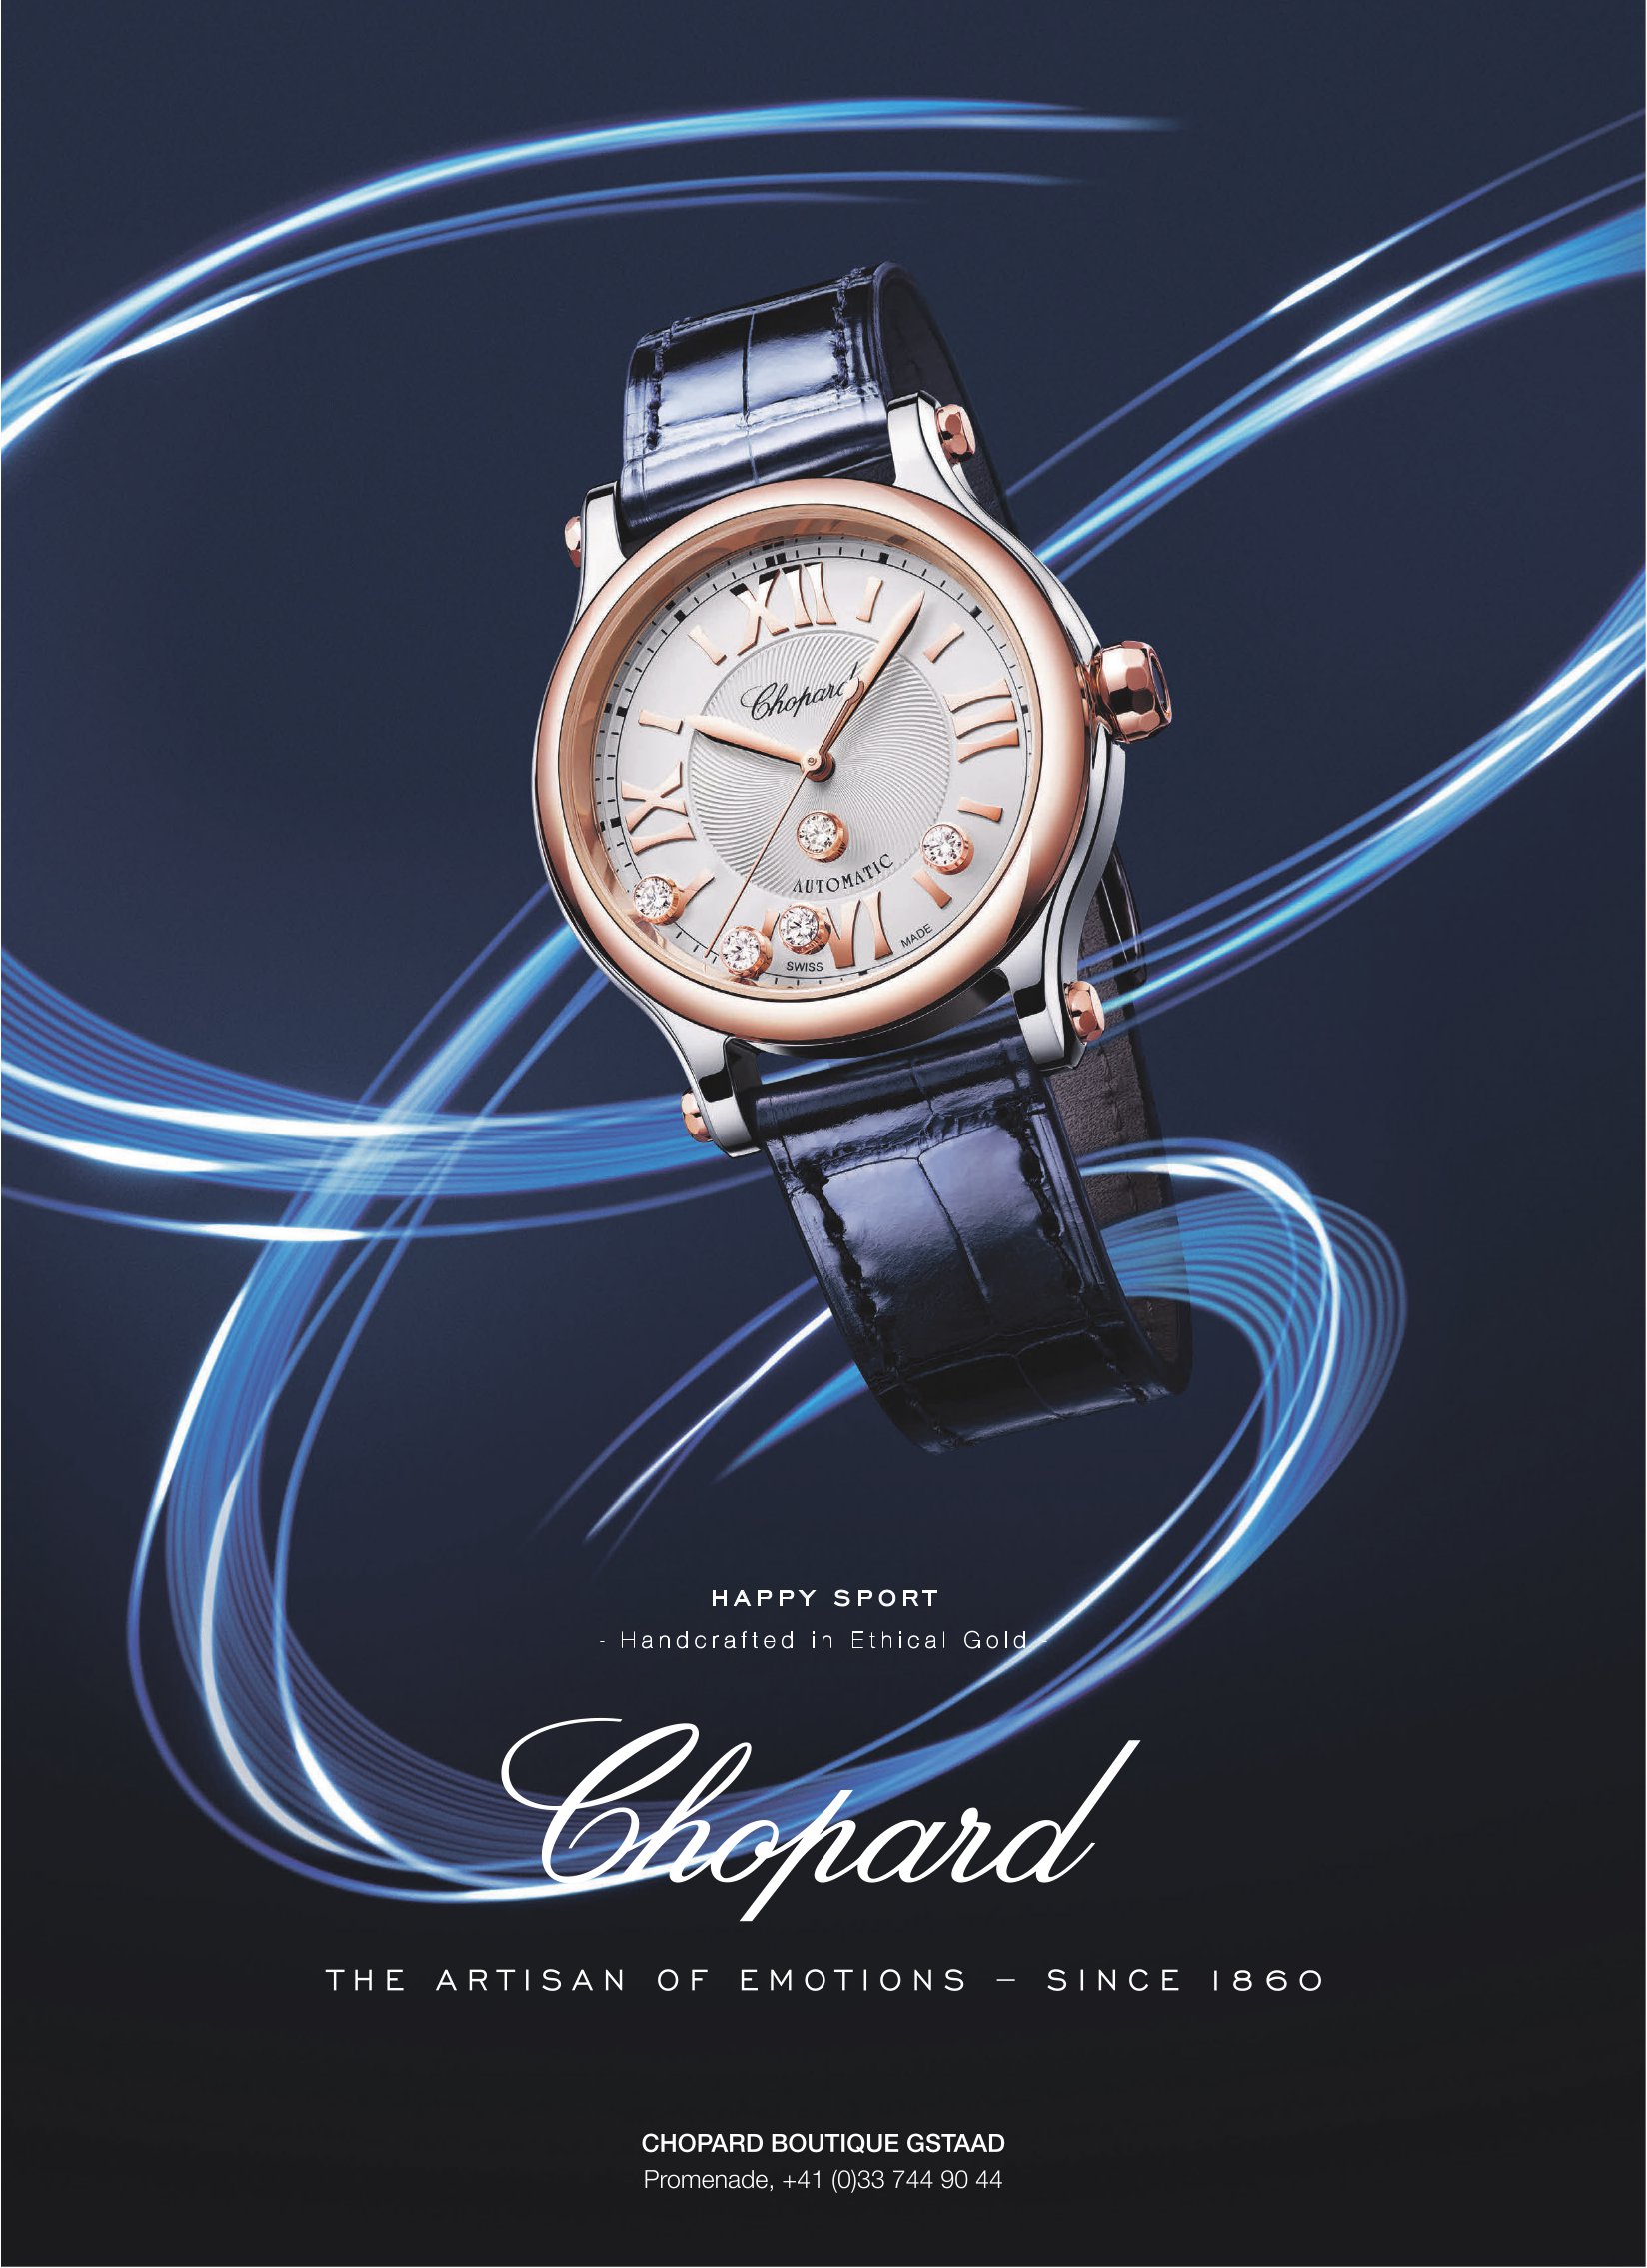 Chopard boutique, Gstaad - The artisan of emotions - since 1860